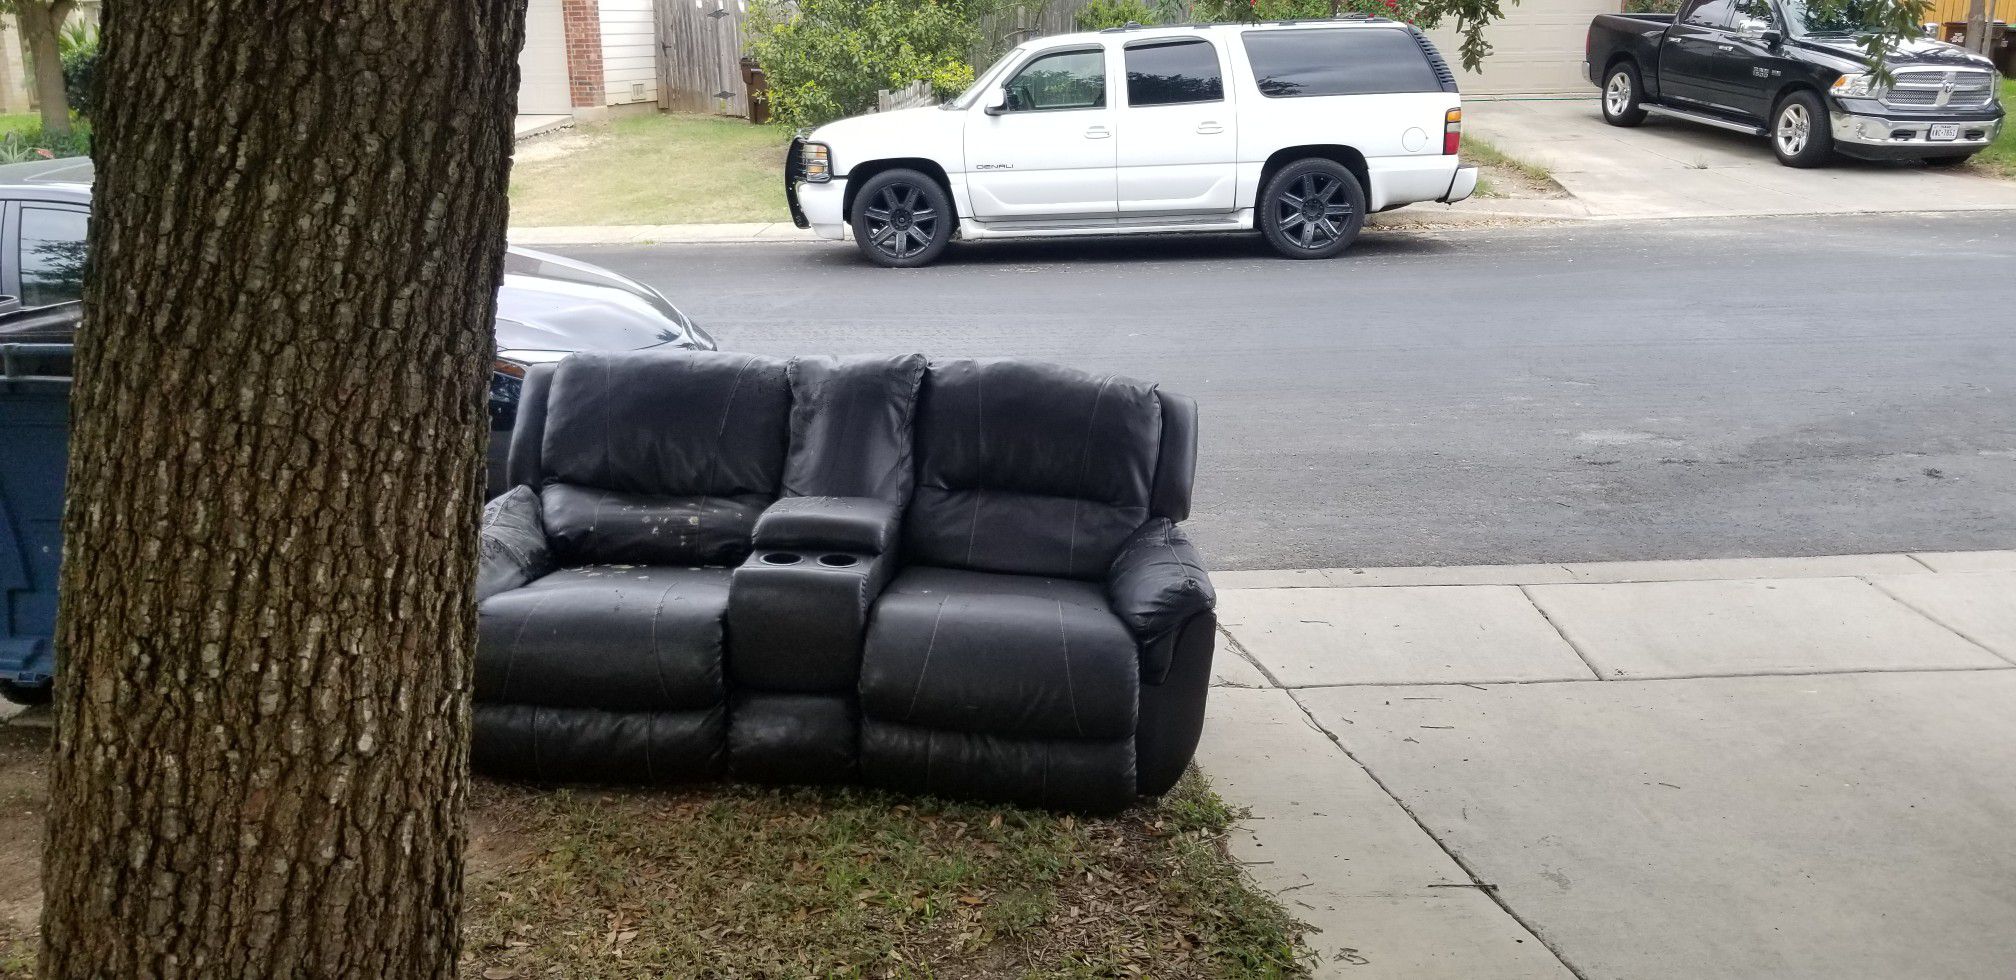 Free recliner couch with storage compartment